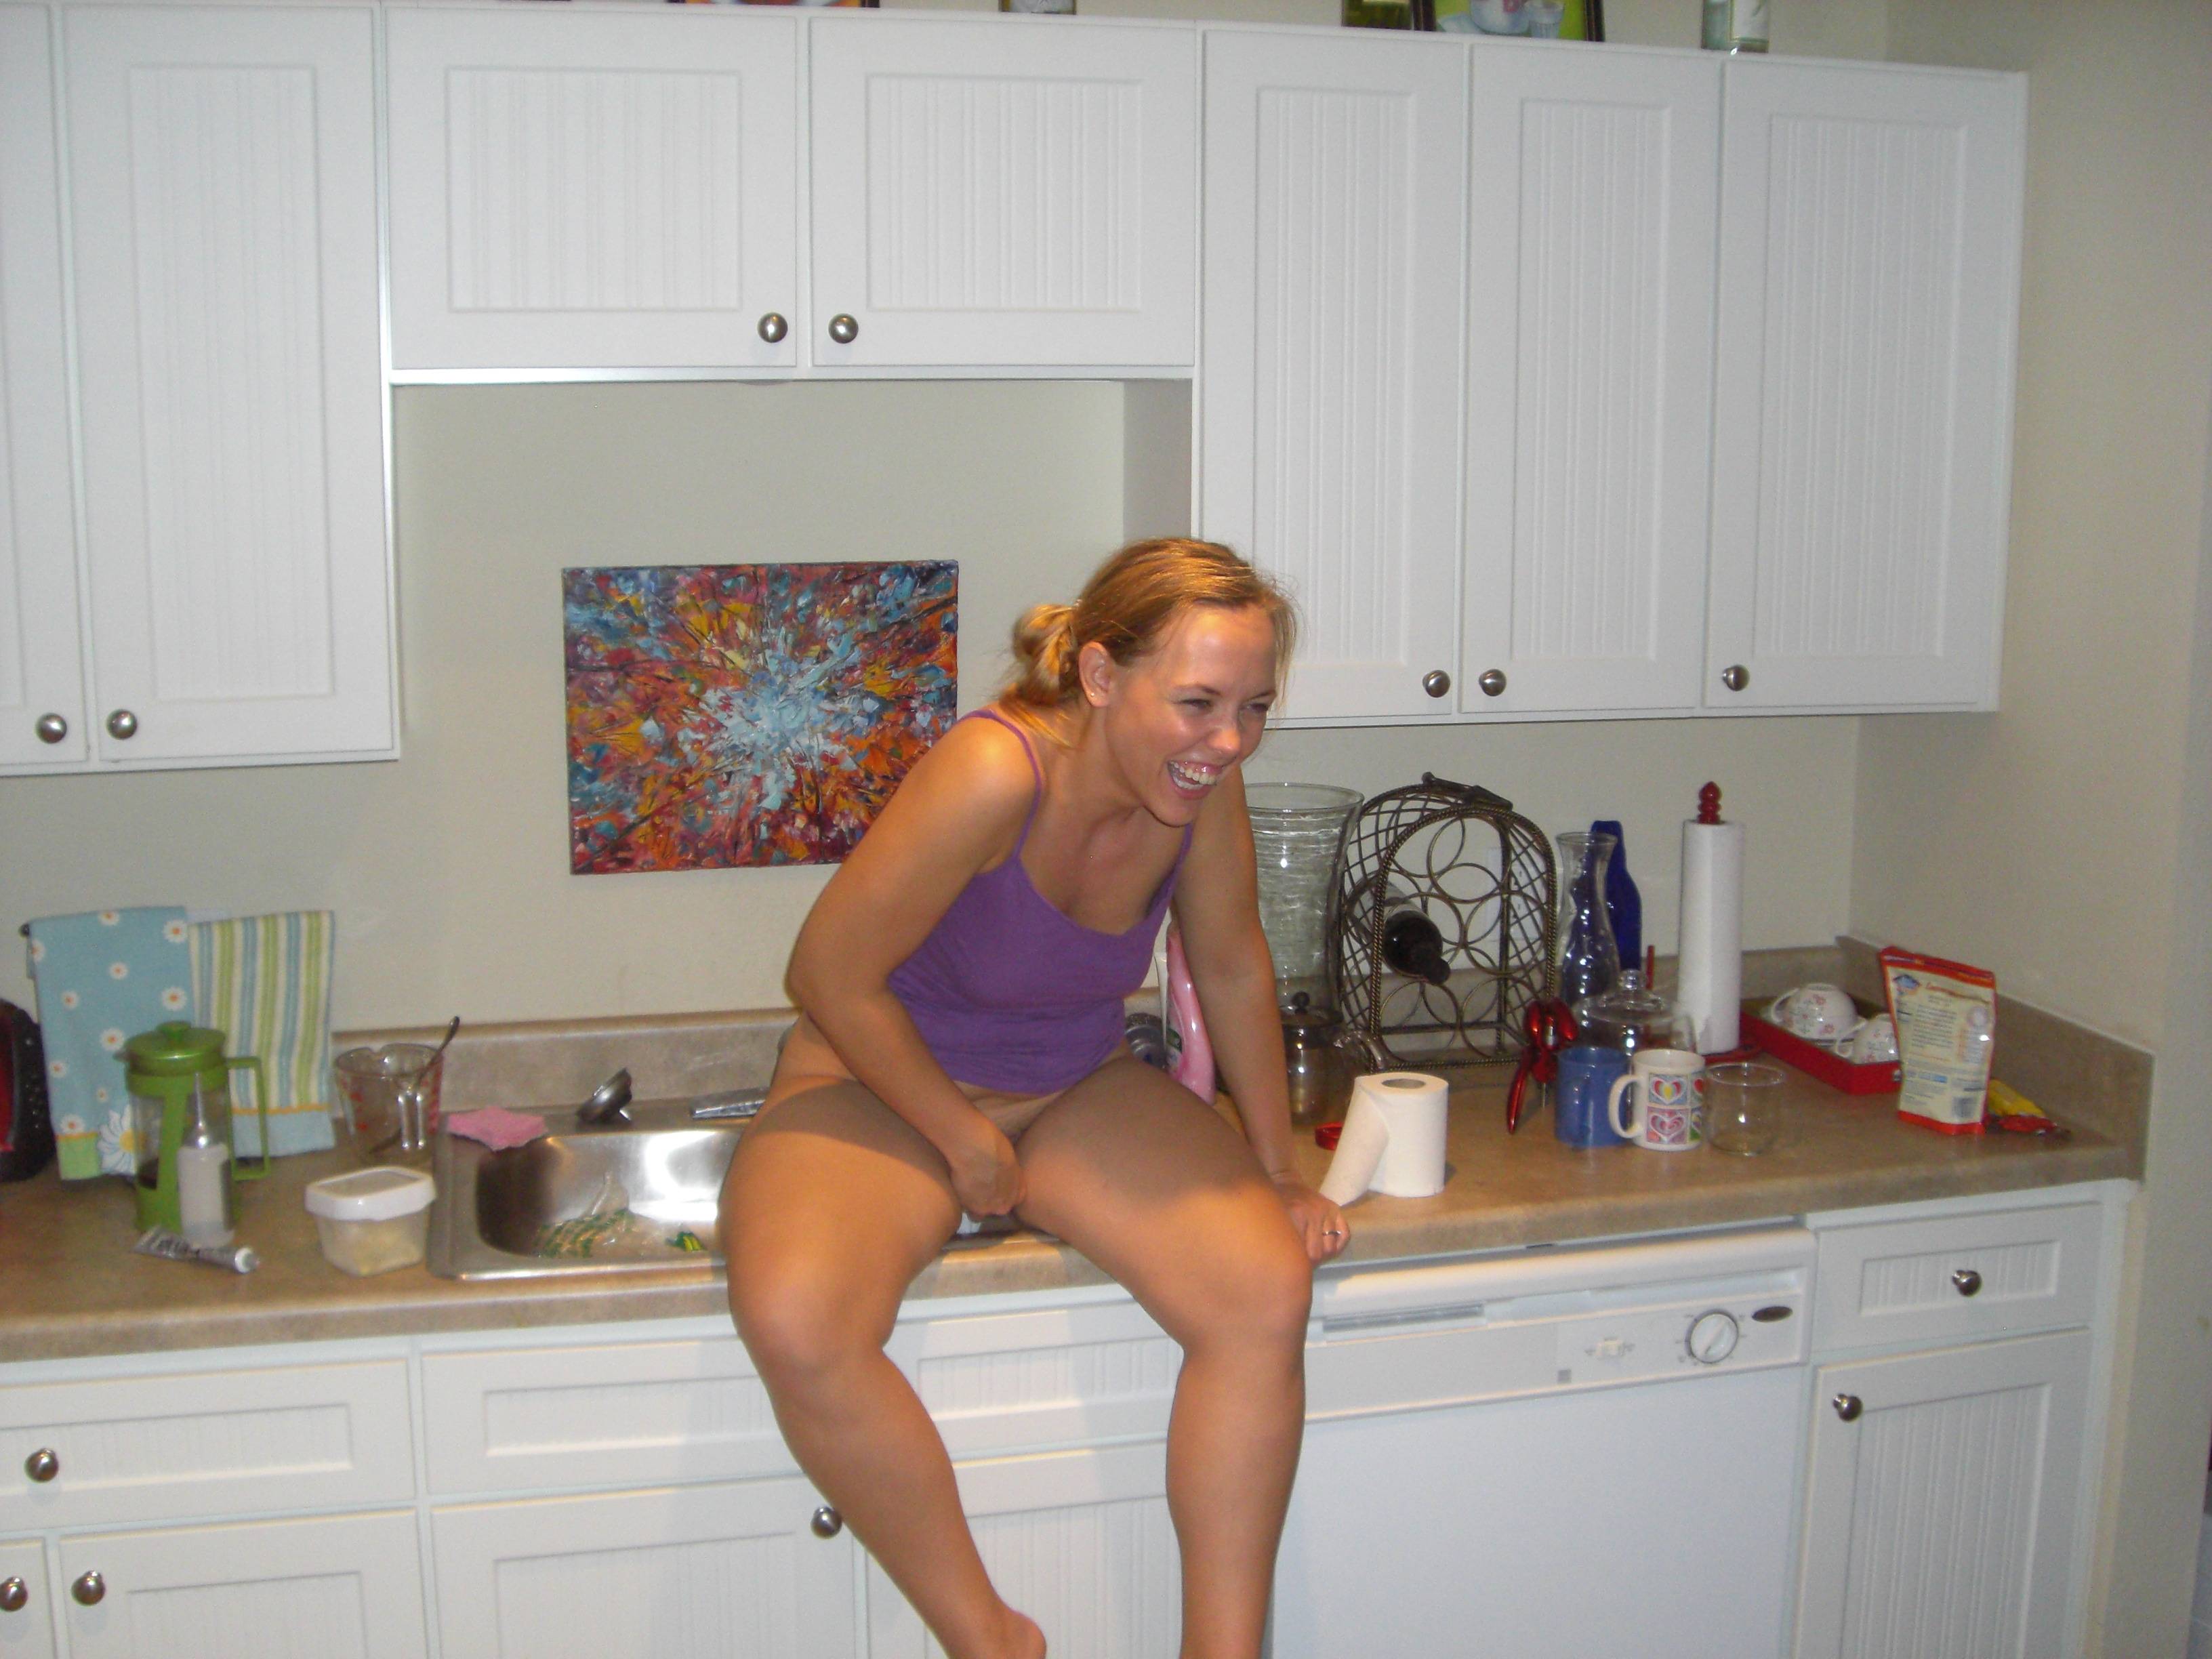 Slap H. reccomend college girl humps sink counter